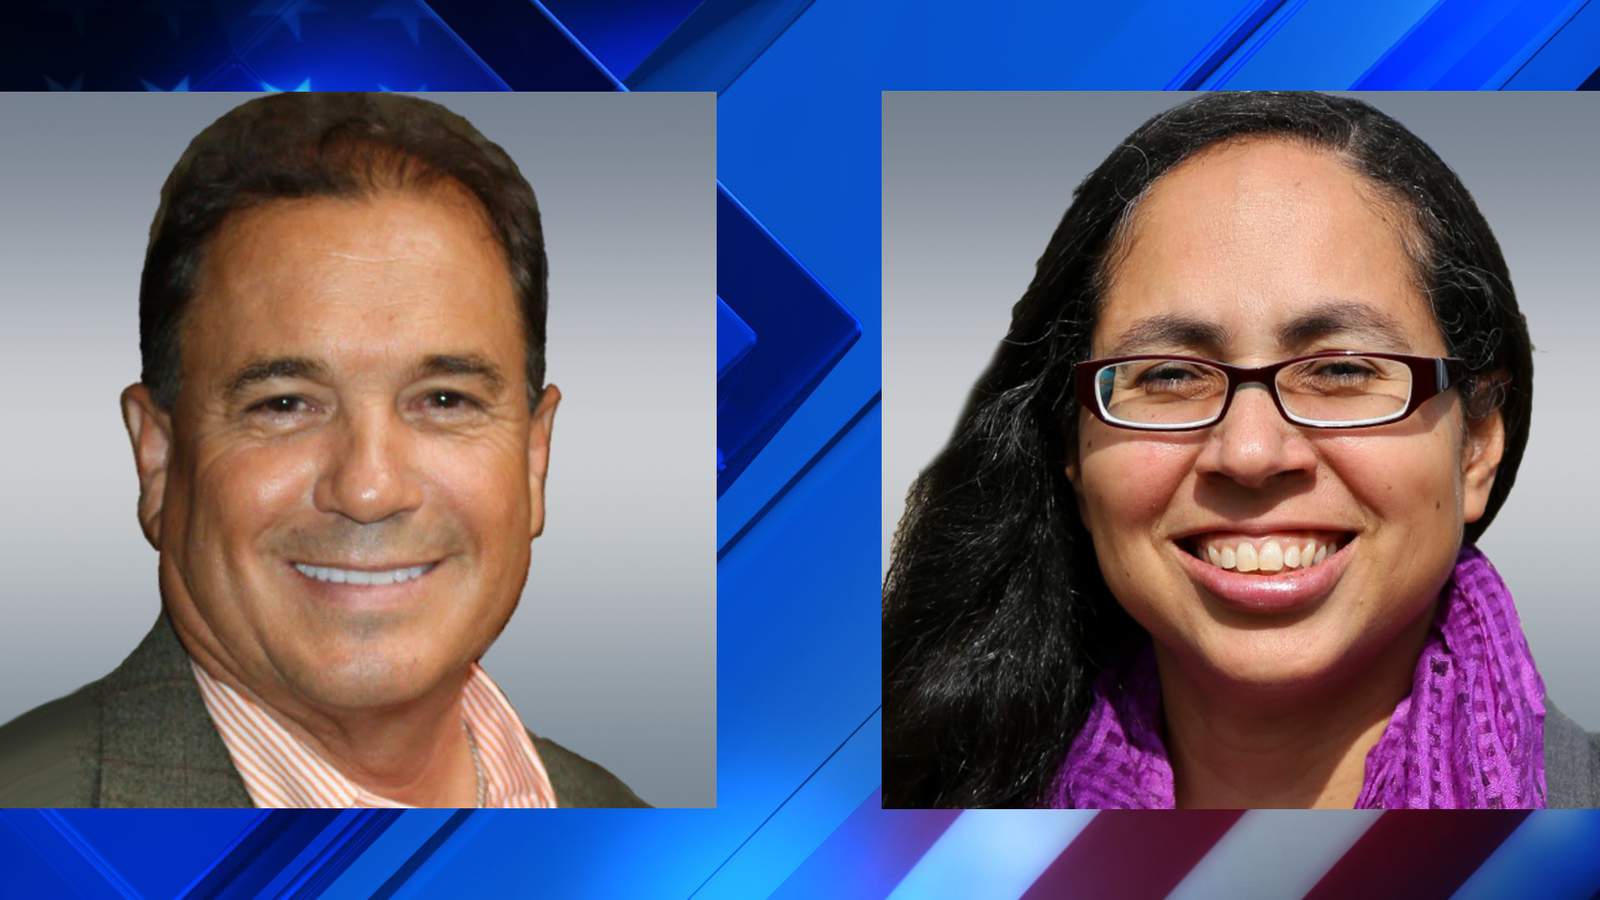 Bexar County Commissioner Sergio ‘Chico’ Rodriguez toppled by challenger Rebeca ‘Becky’ Clay-Flores in Precinct 1